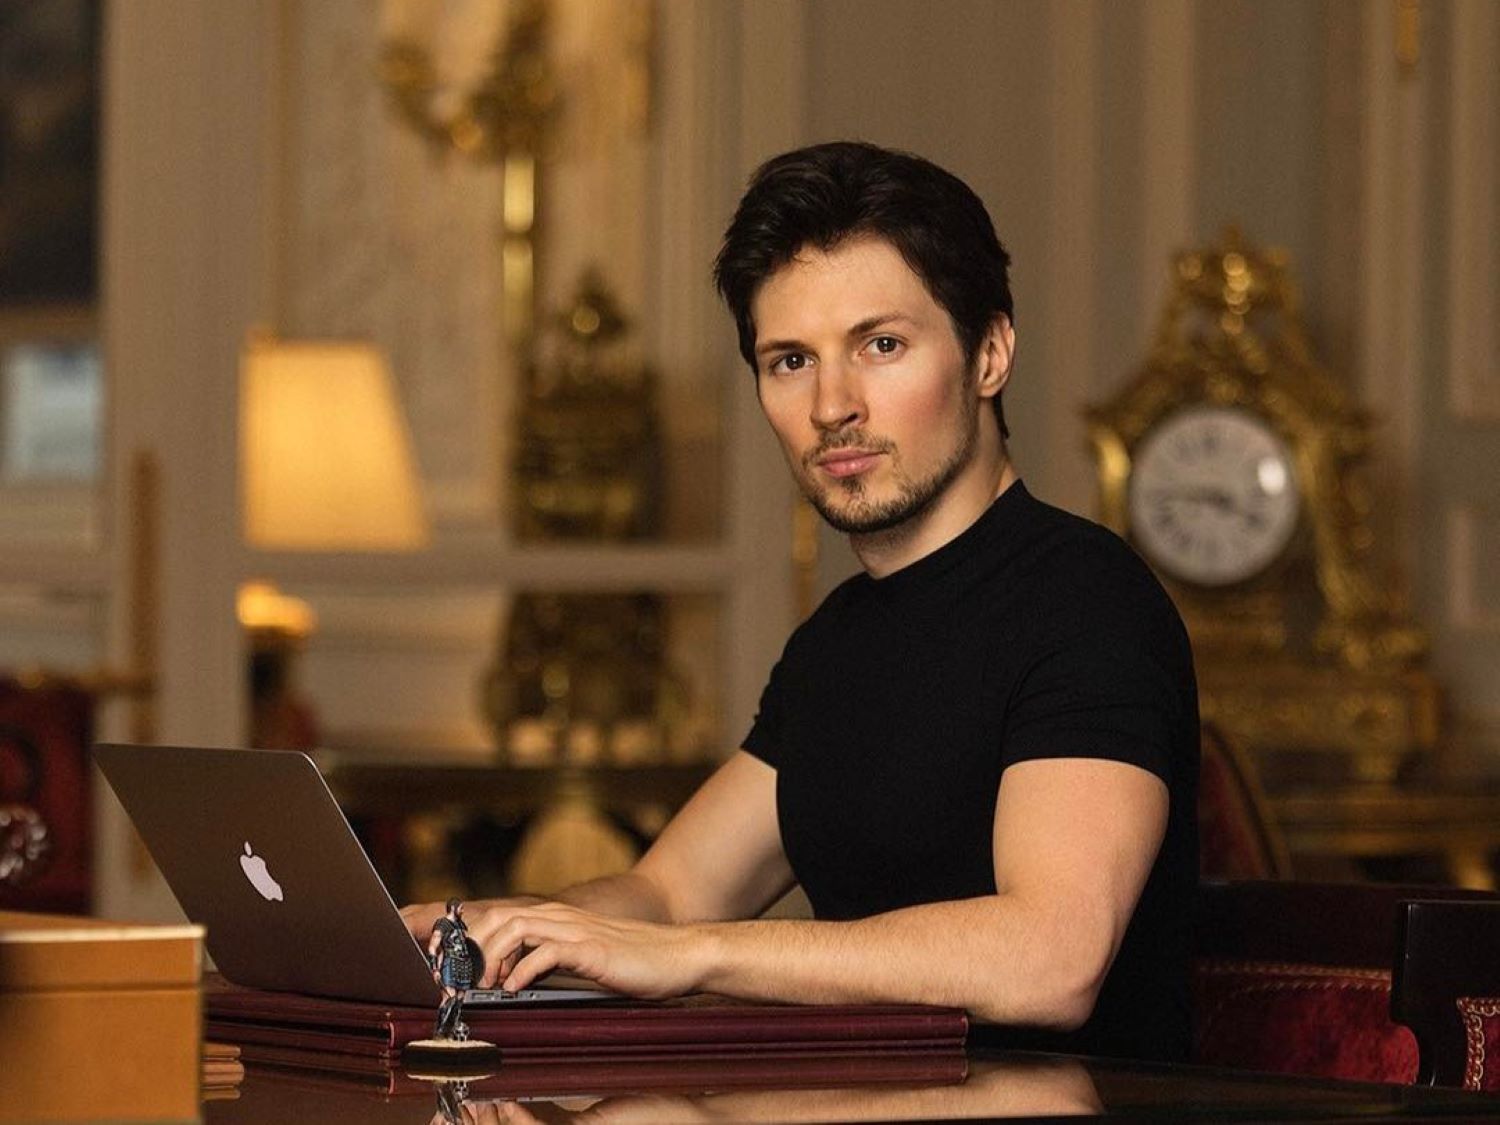 Pavel Durov is working